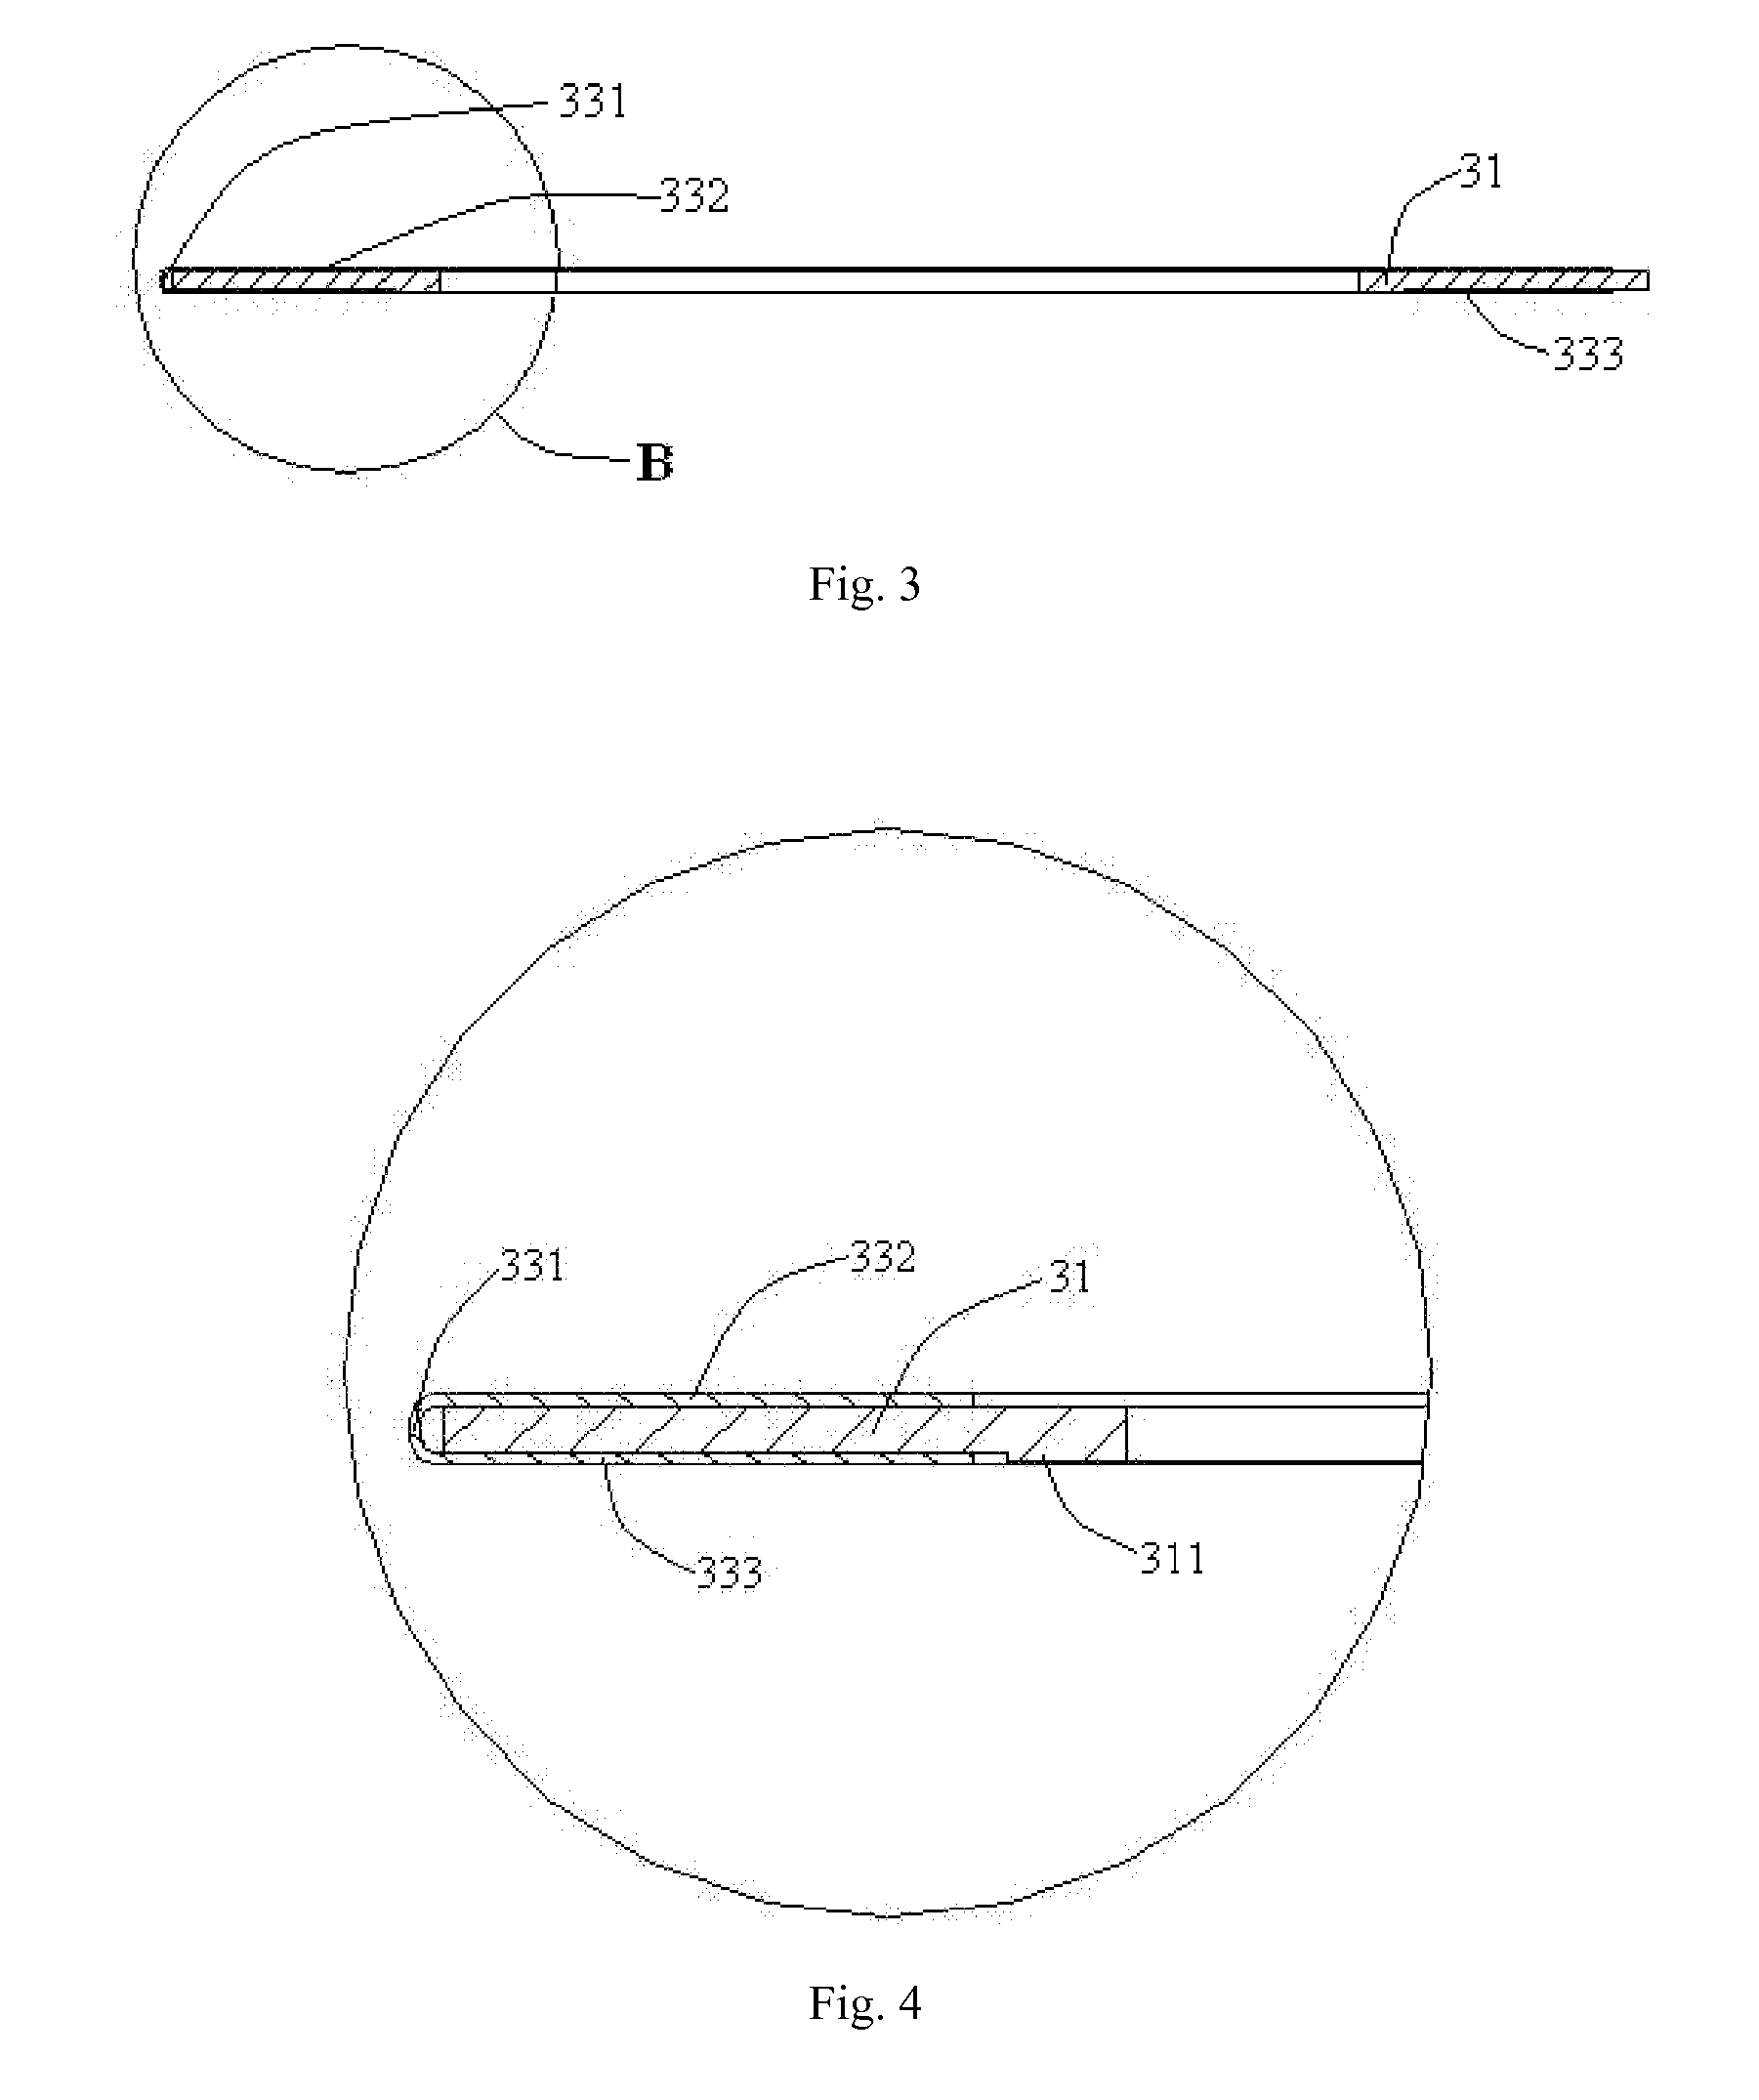 Cap assembly for use in lithium ion batteries